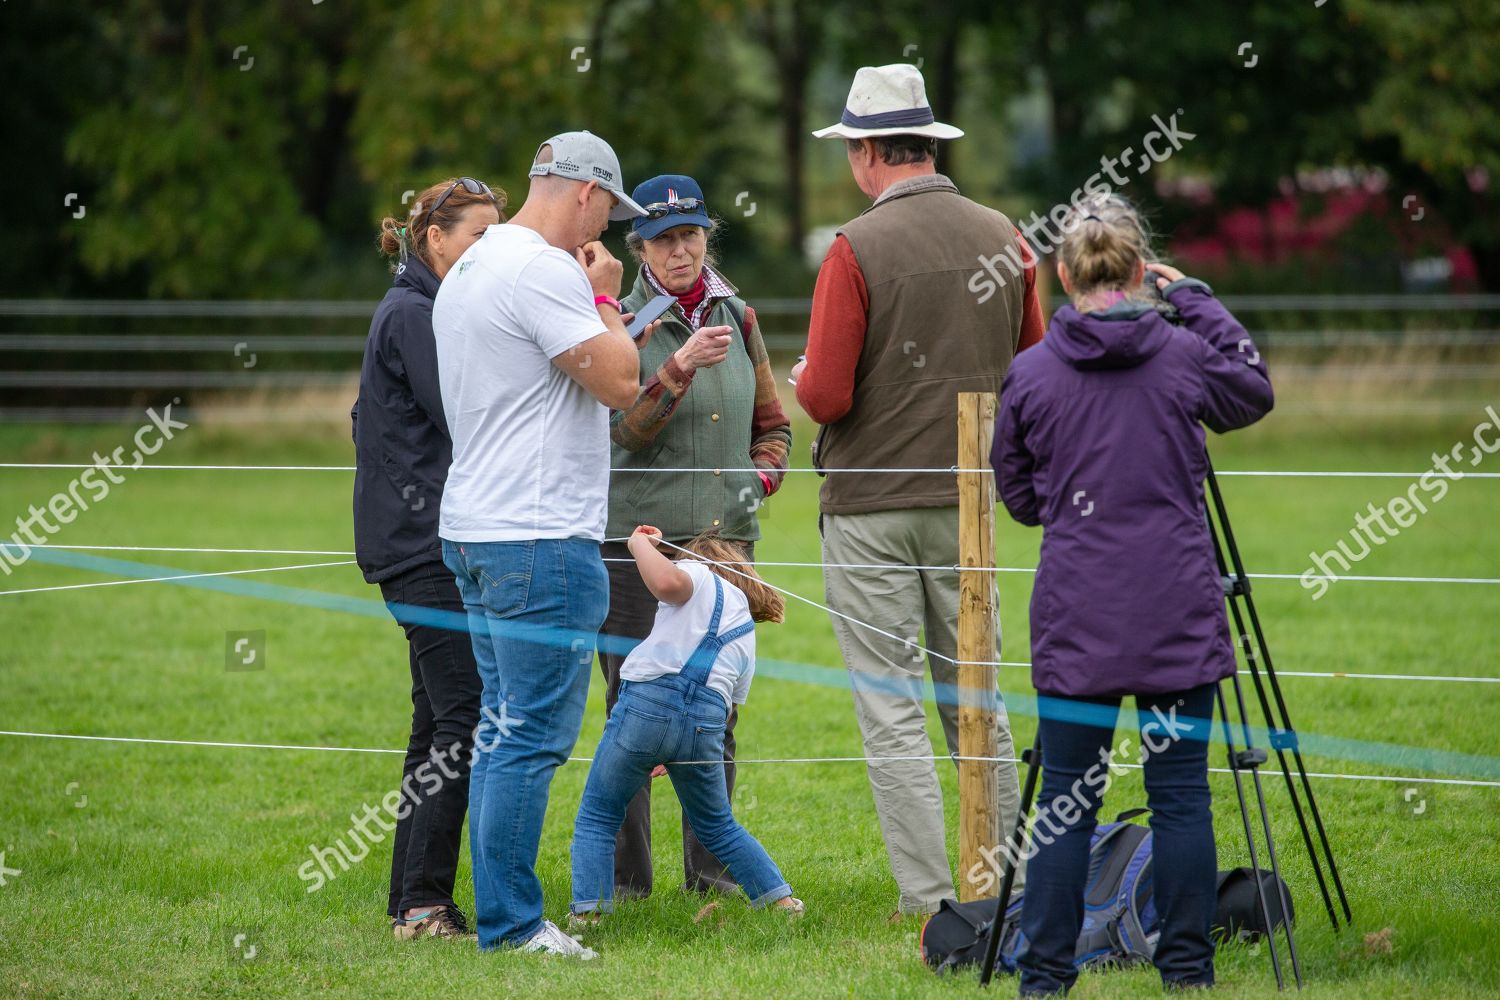 land-rover-burghley-horse-trials-day-3-stamford-lincolnshire-uk-shutterstock-editorial-10403945bu.jpg